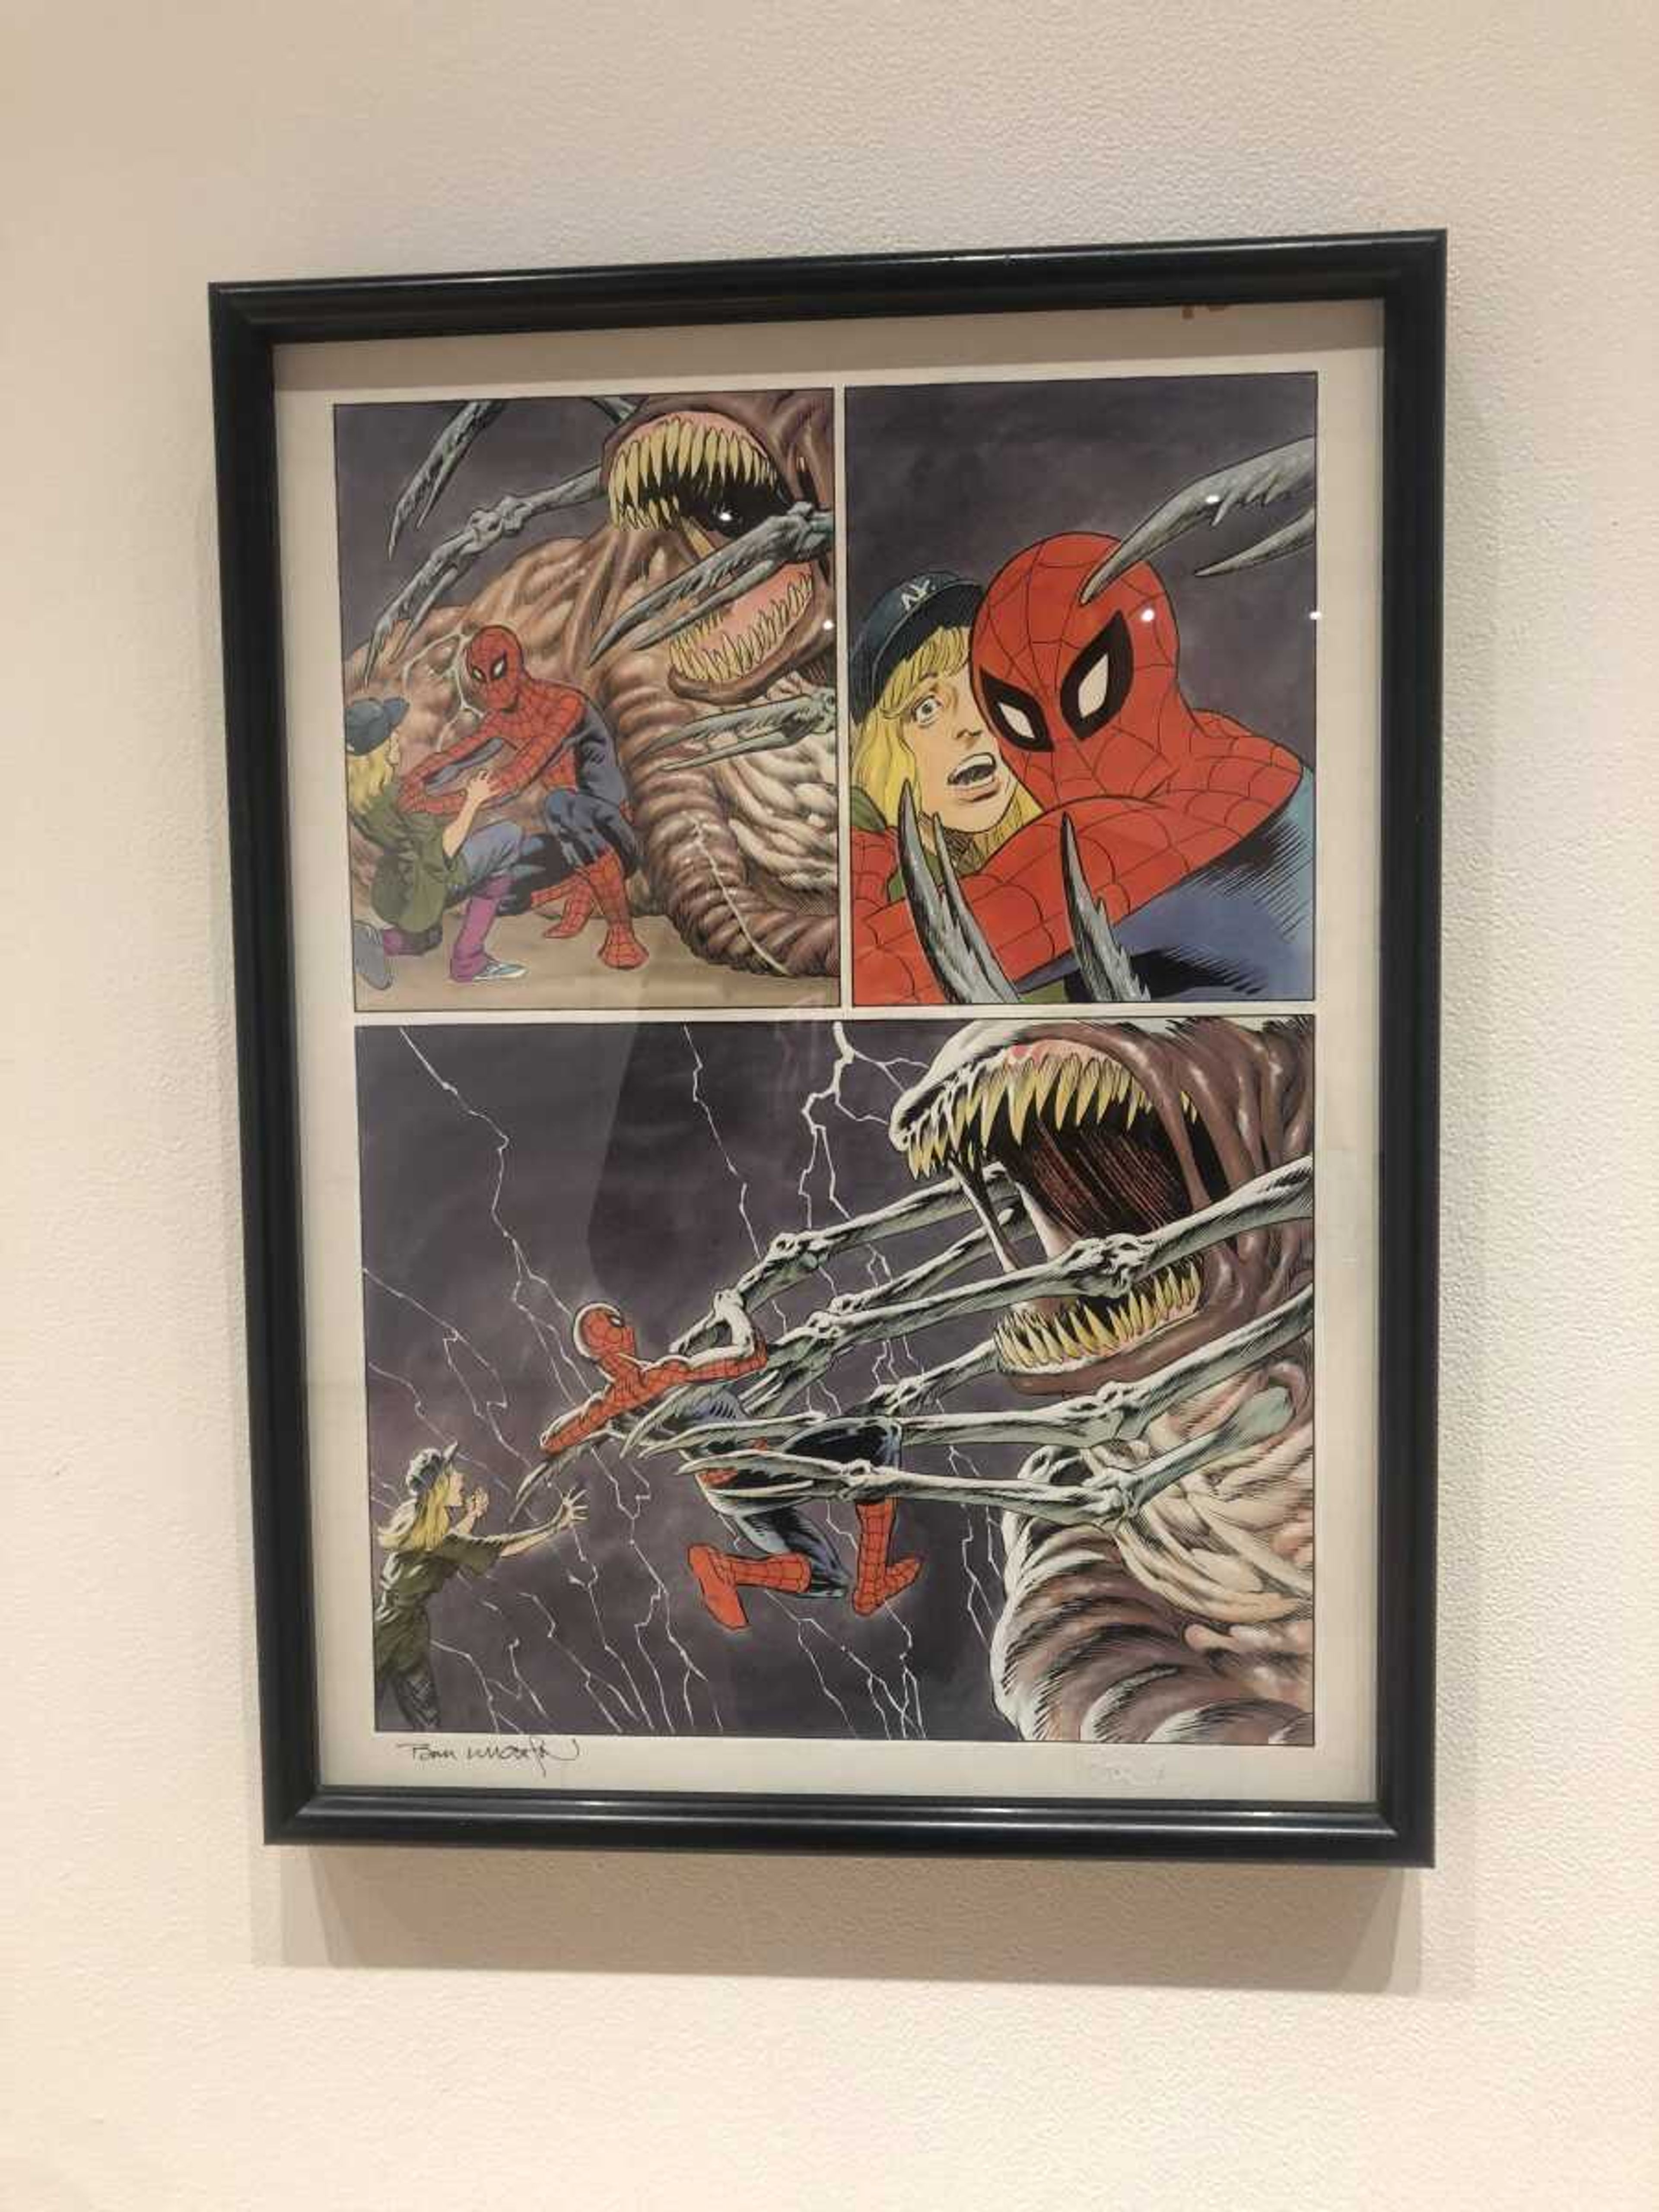 Bernie Wrightson's Spider-Man, from Graphic Novel, #22 featured in Crisp Museum's "Comic Art from the collection of Terry Godwin."